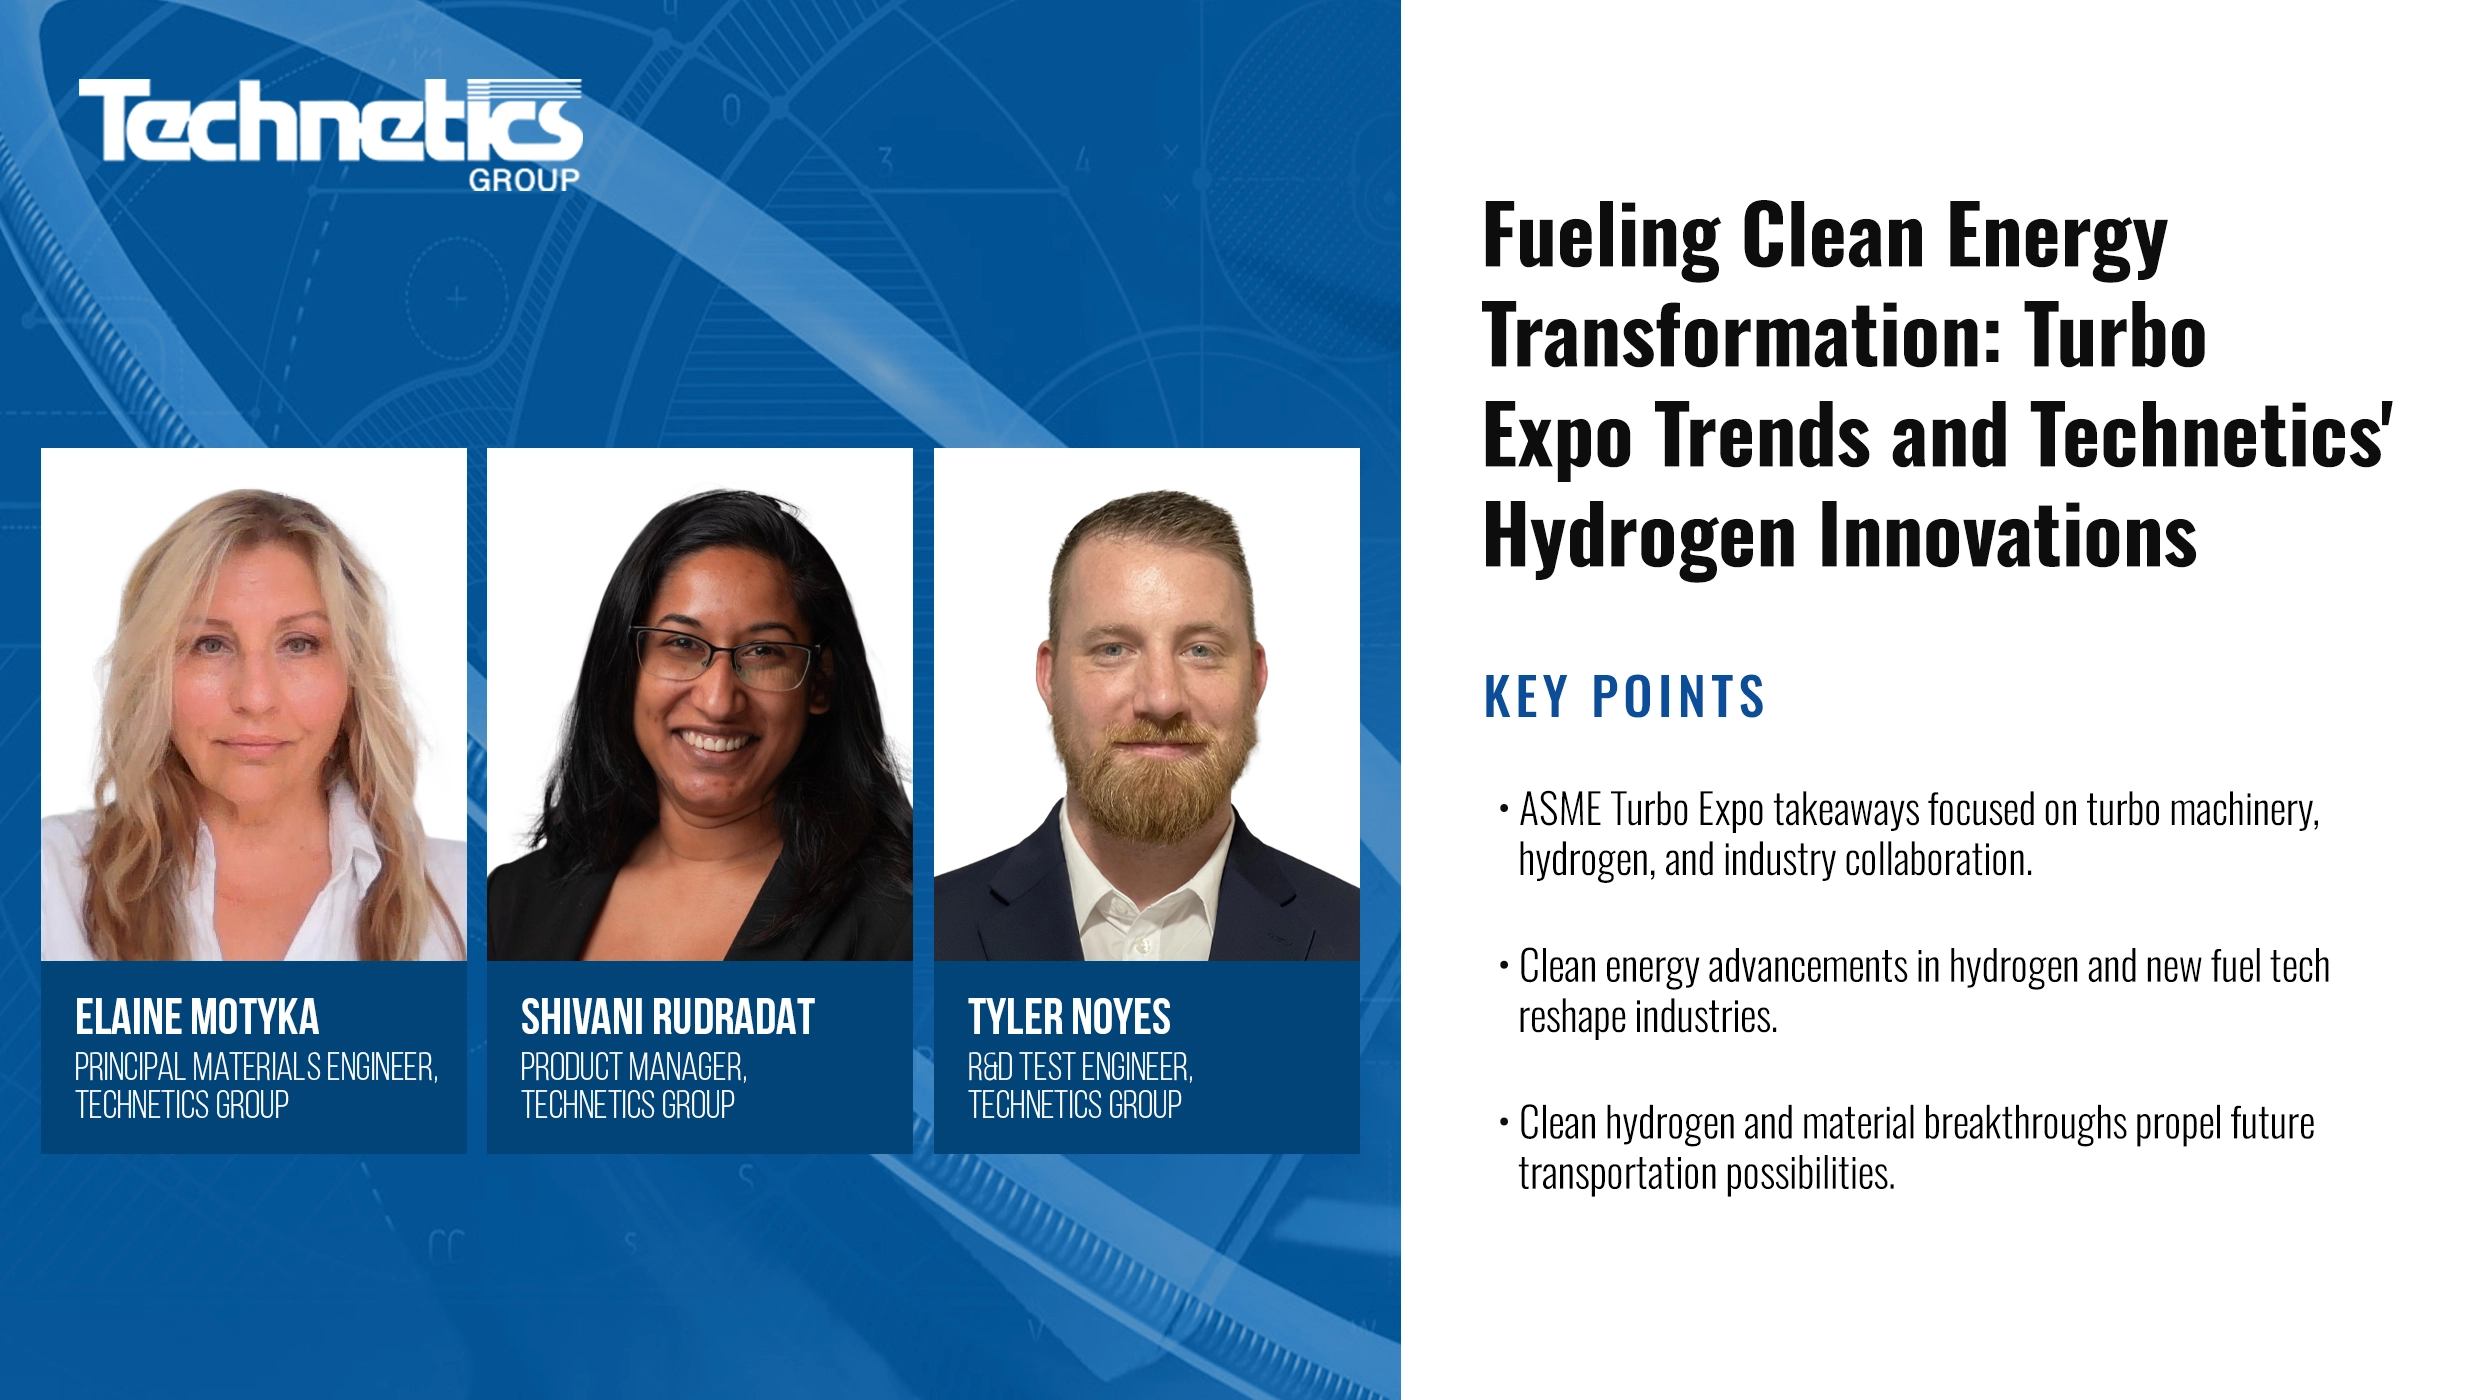 Fueling Clean Energy Transformation: Turbo Expo Trends and Technetics’ Hydrogen Innovations